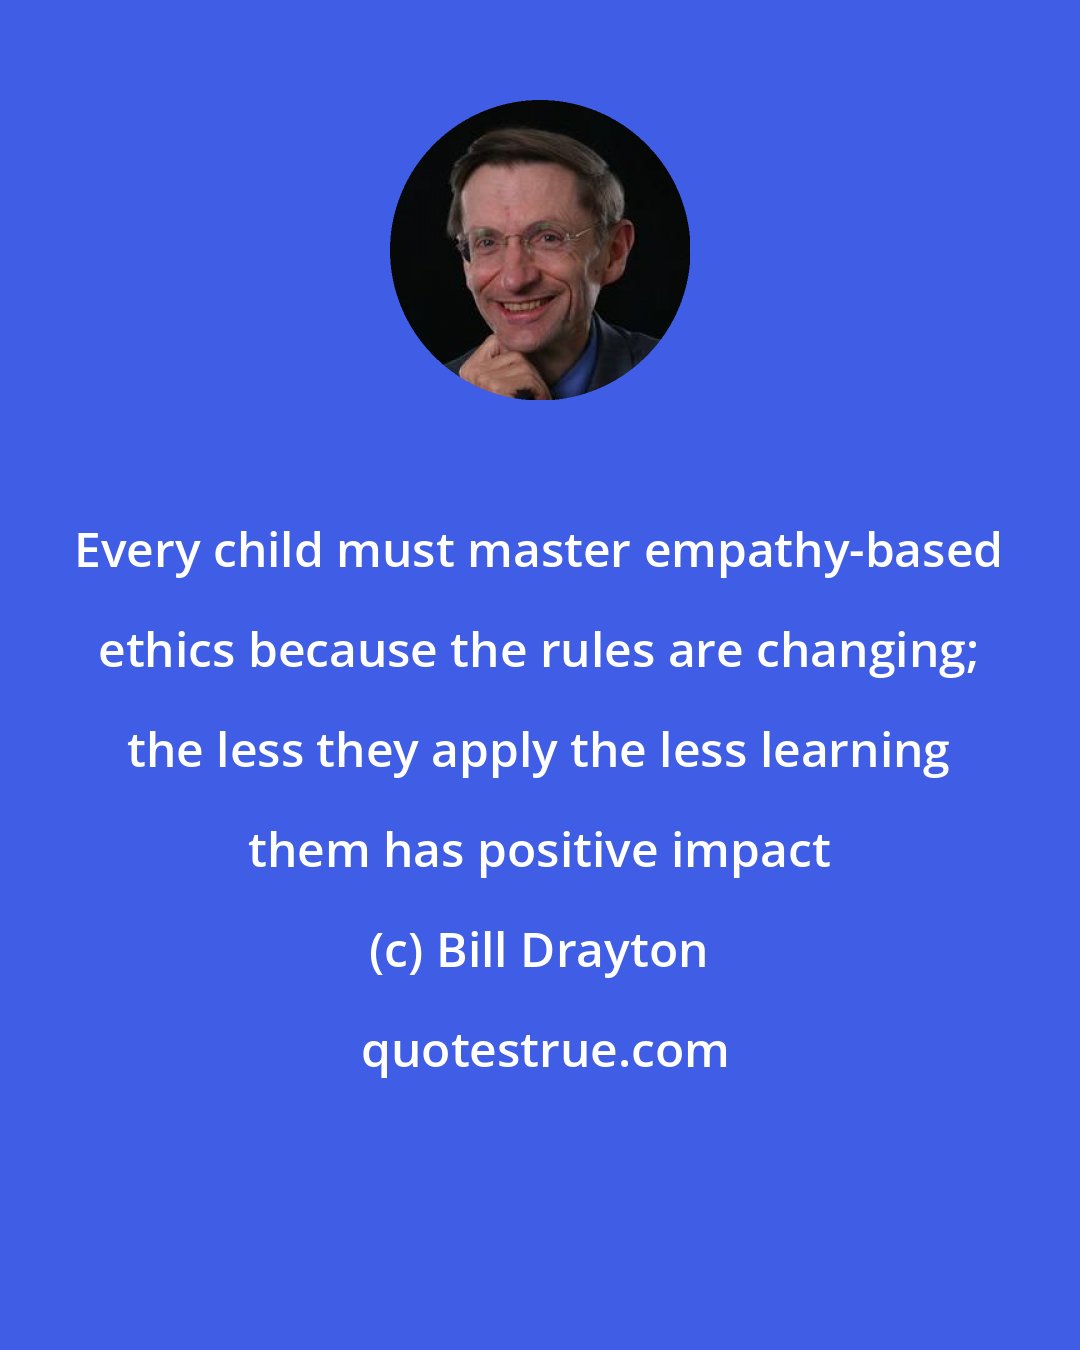 Bill Drayton: Every child must master empathy-based ethics because the rules are changing; the less they apply the less learning them has positive impact